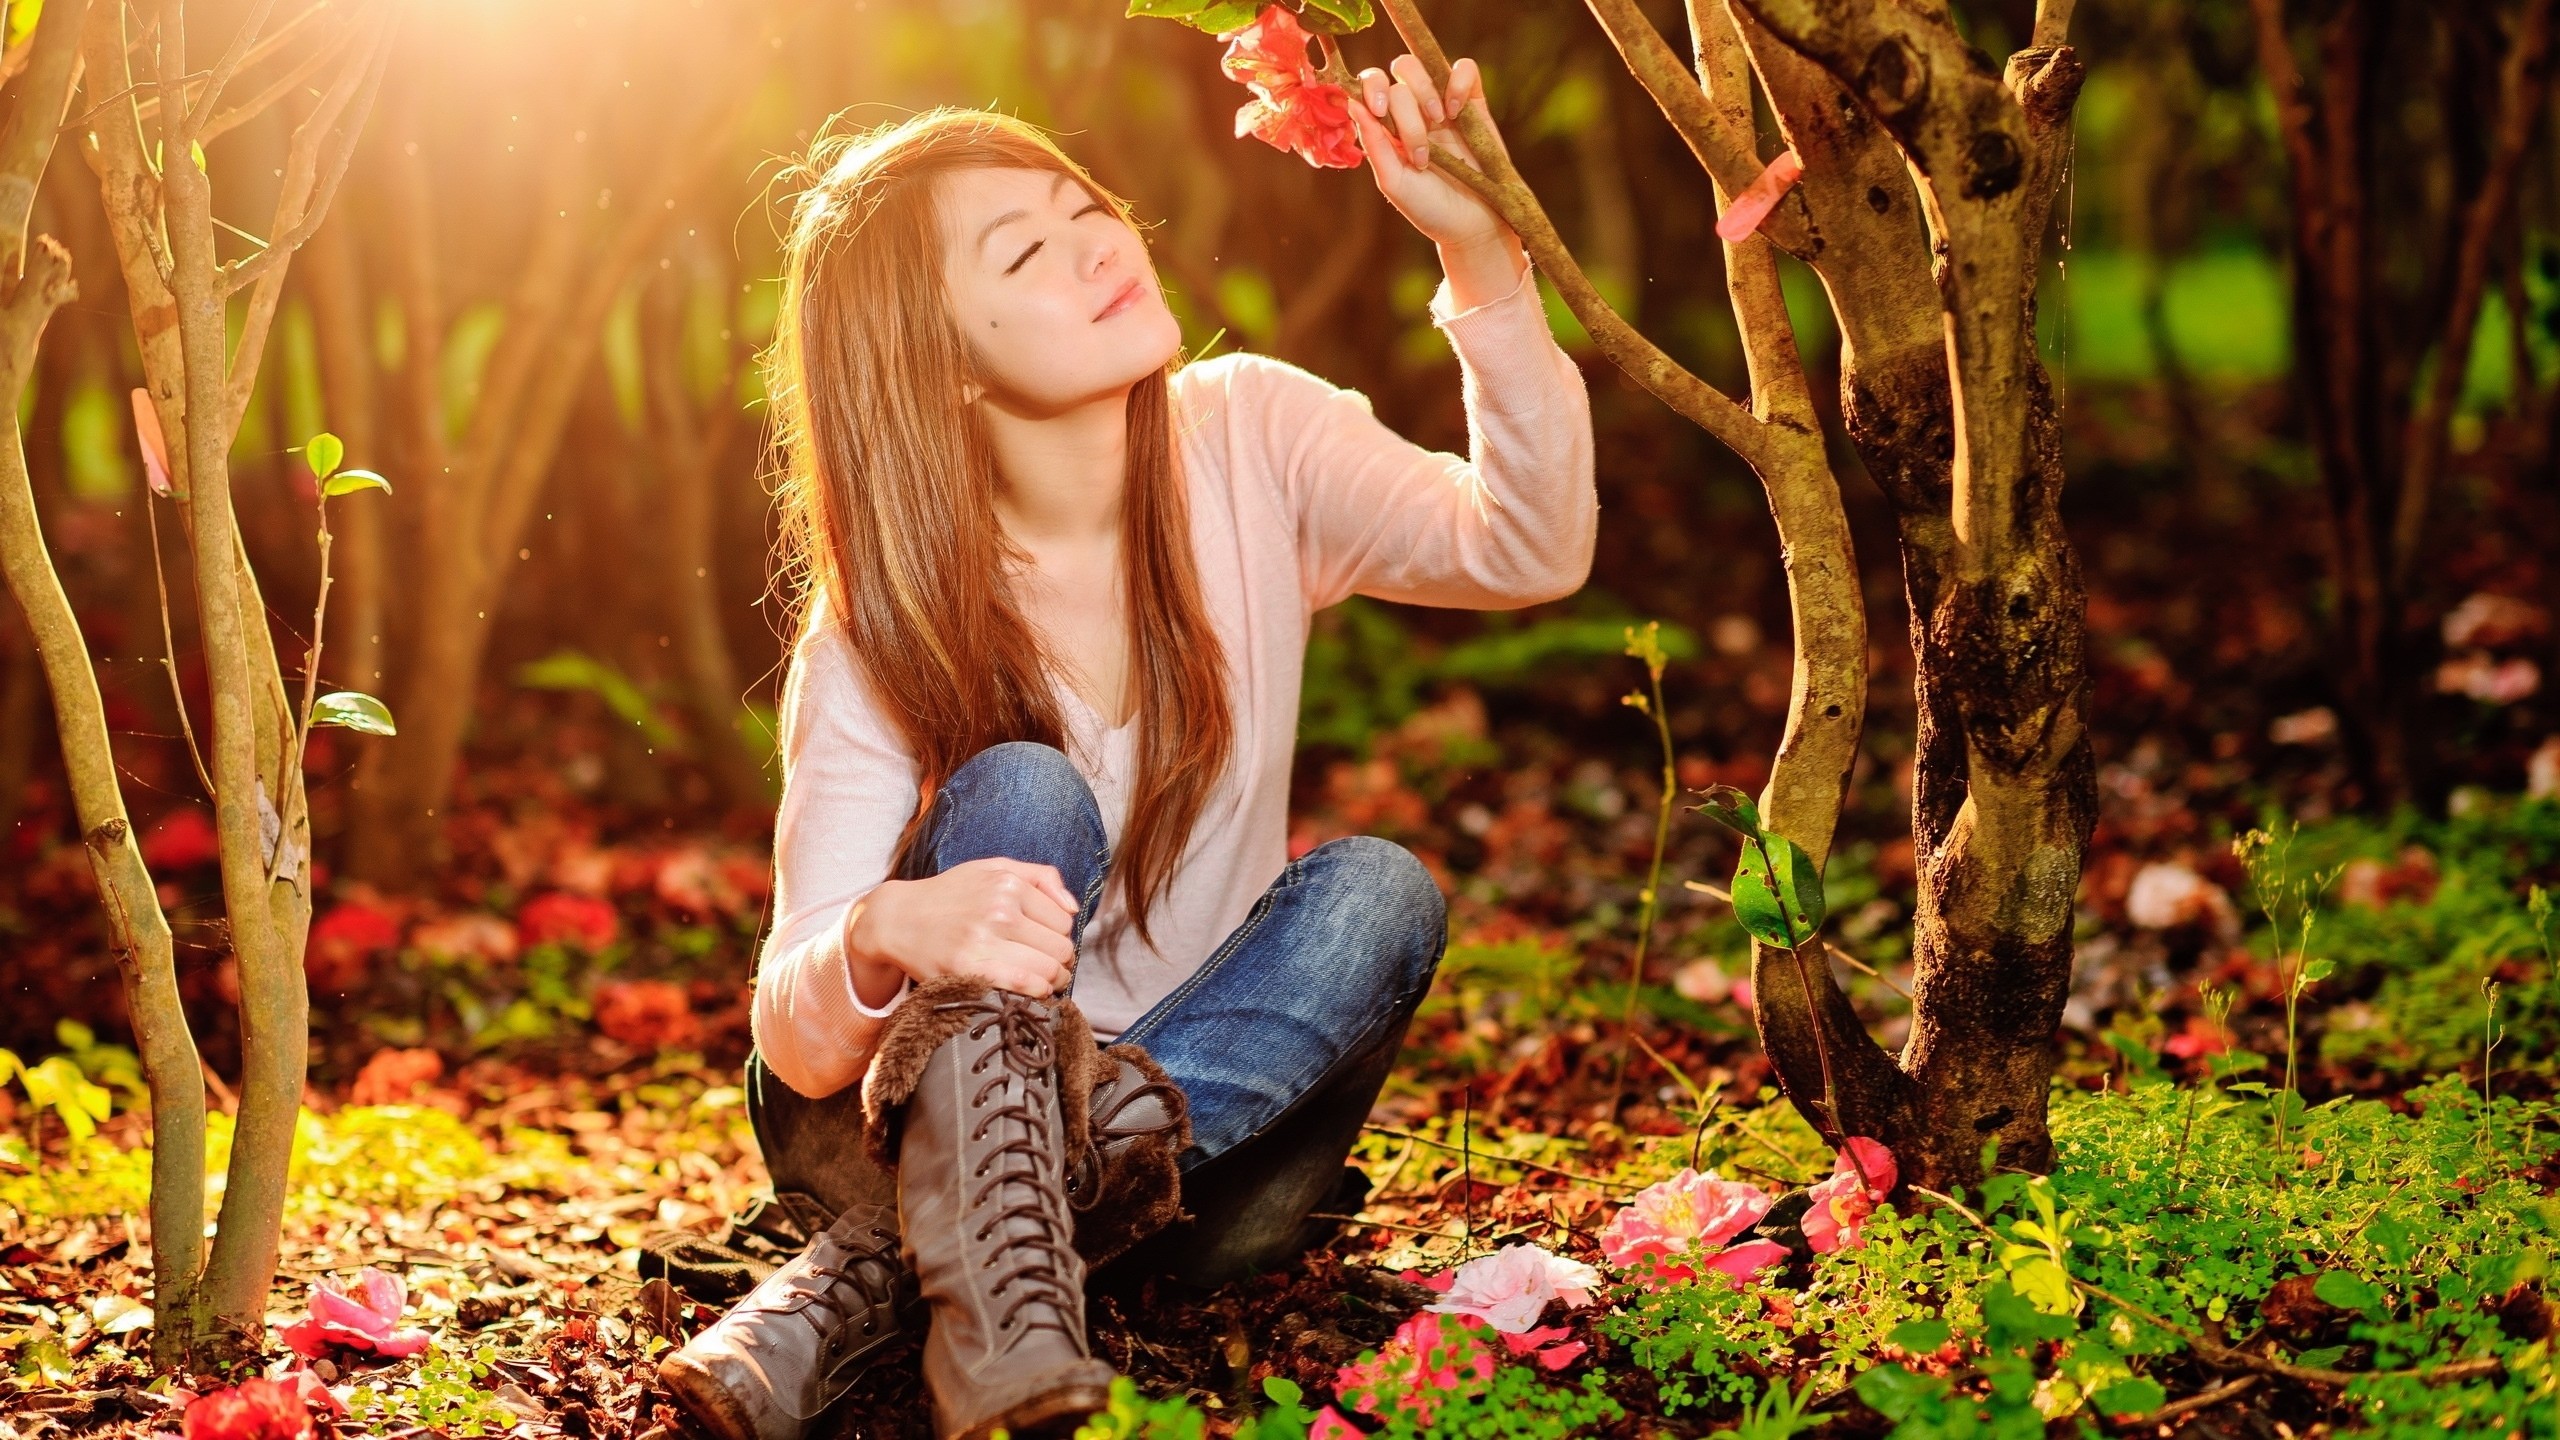 People 2560x1440 women model brunette long hair nature trees forest closed eyes women outdoors sitting Asian smiling flowers sunlight boots jeans backlighting